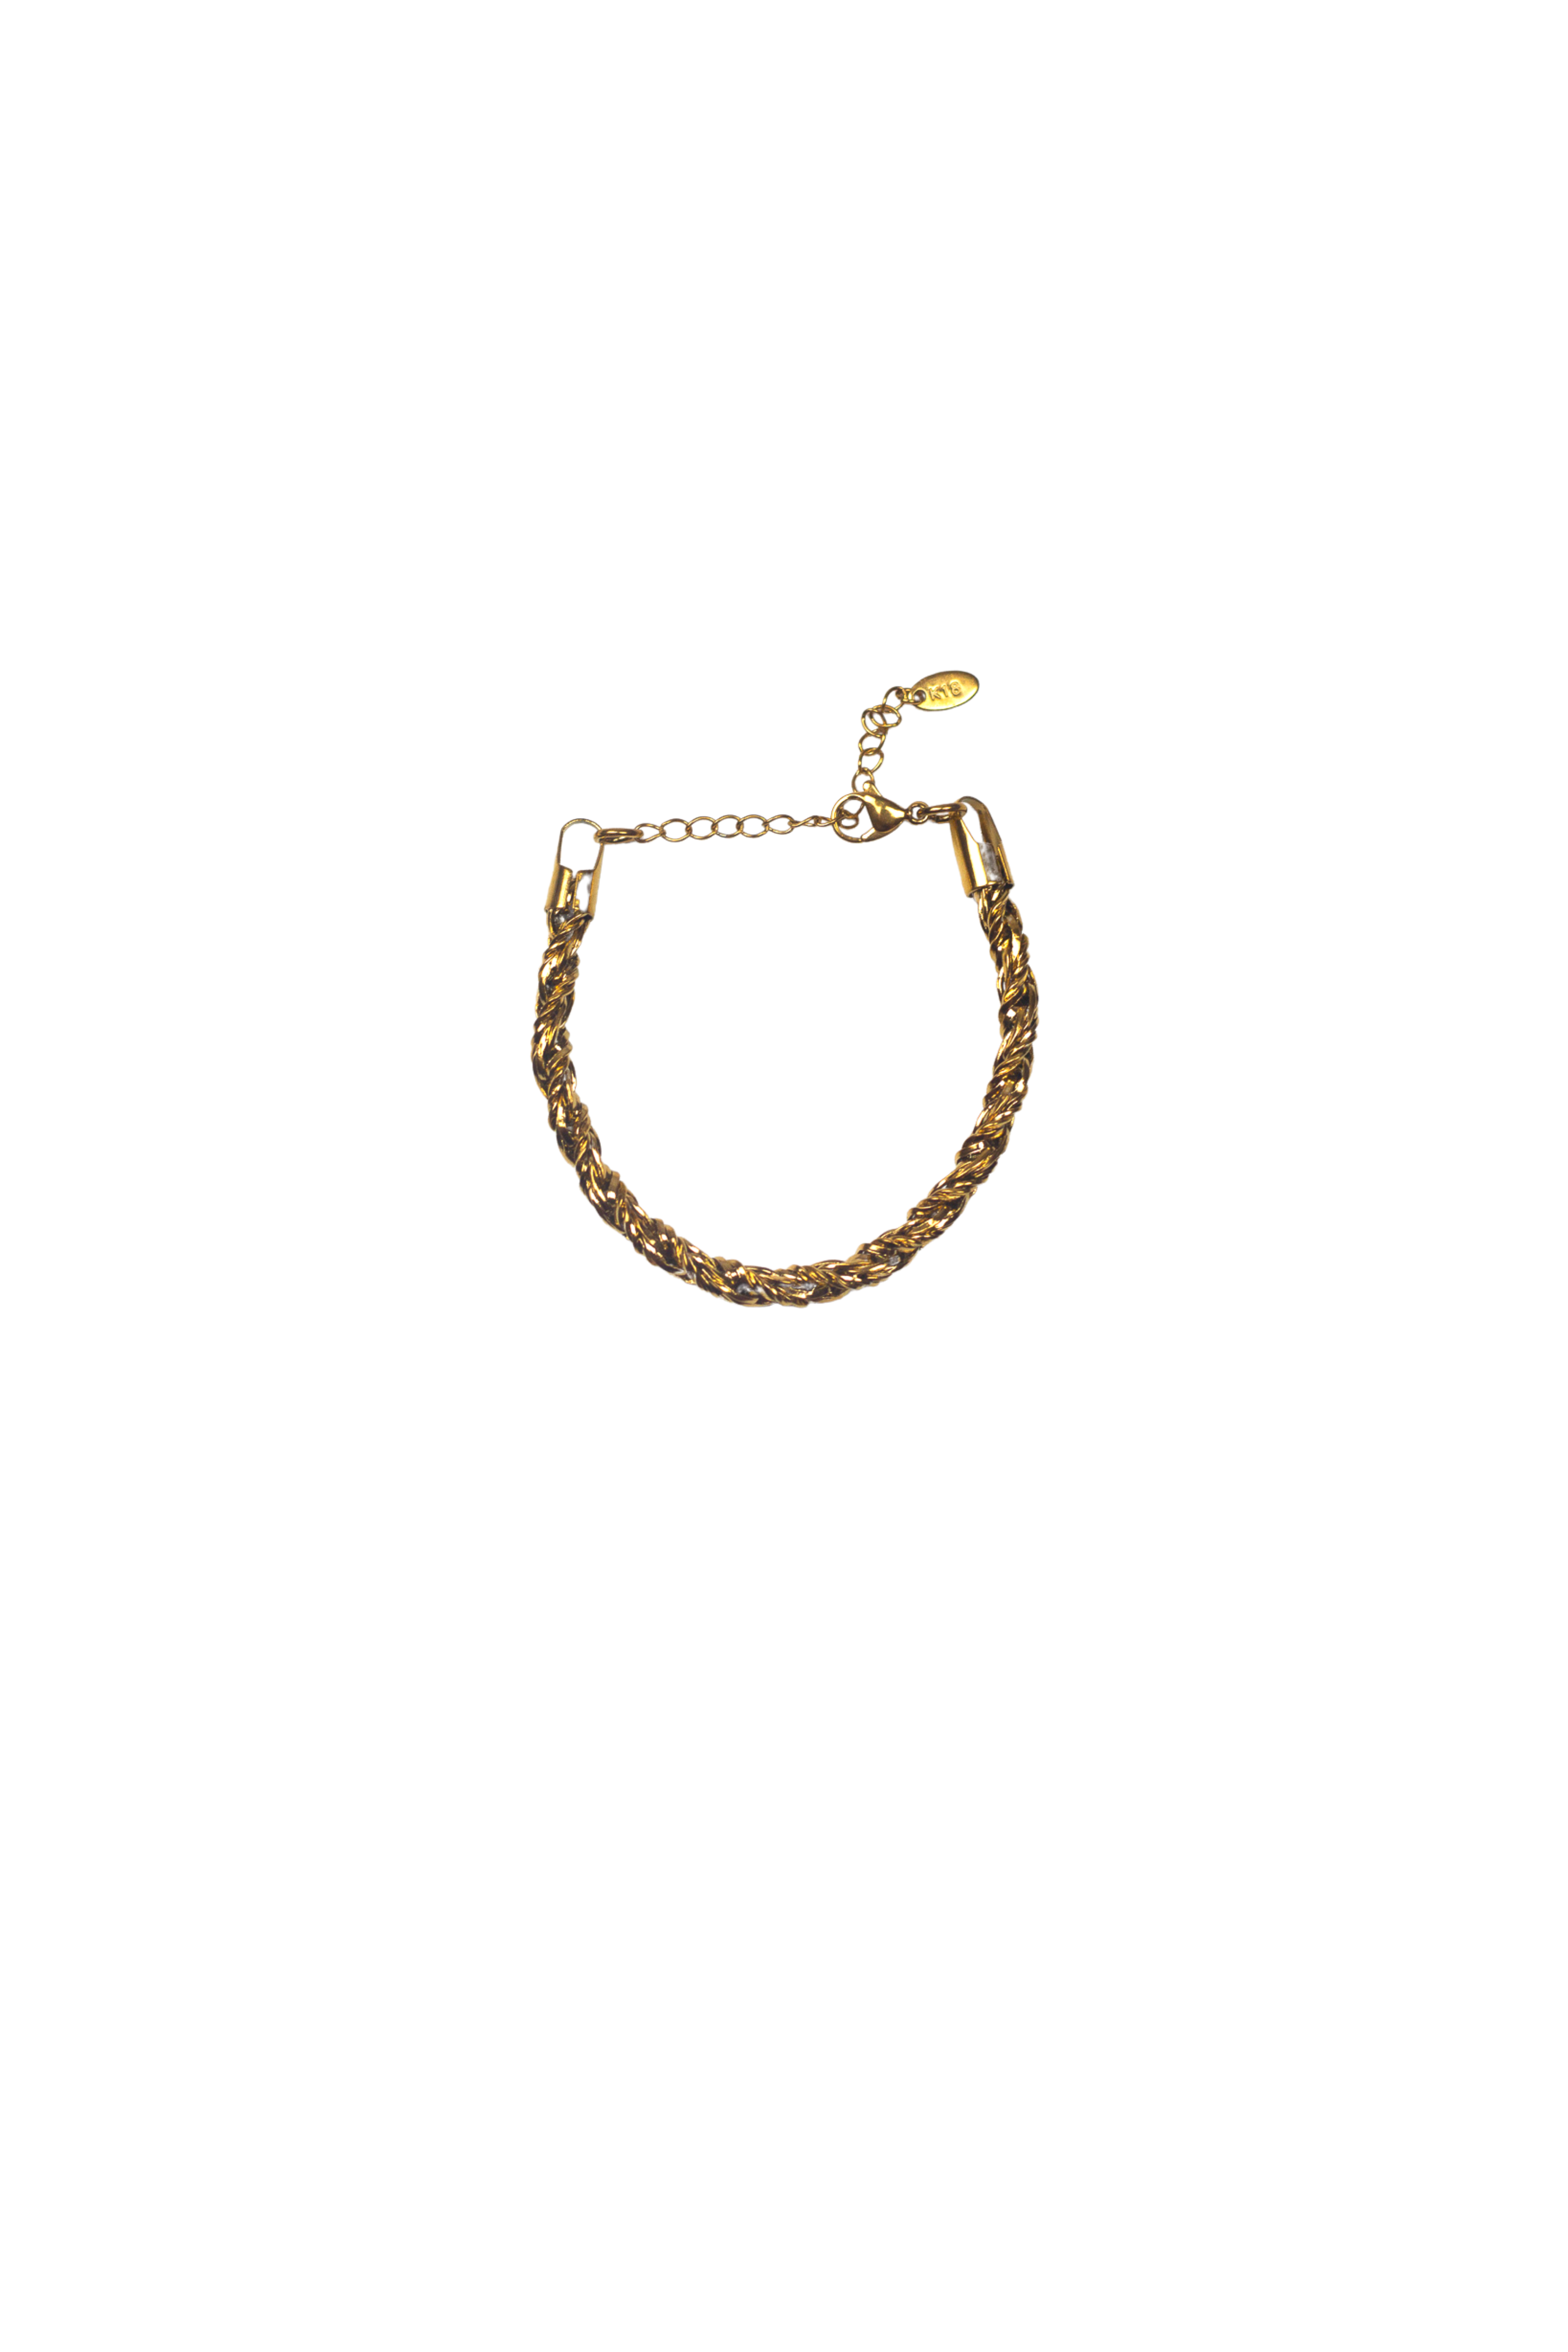 Stainless steel gold twist chain bracelet. The bracelet has a rounded clasp. Named "The Toyo" Twist Set by E's Element.